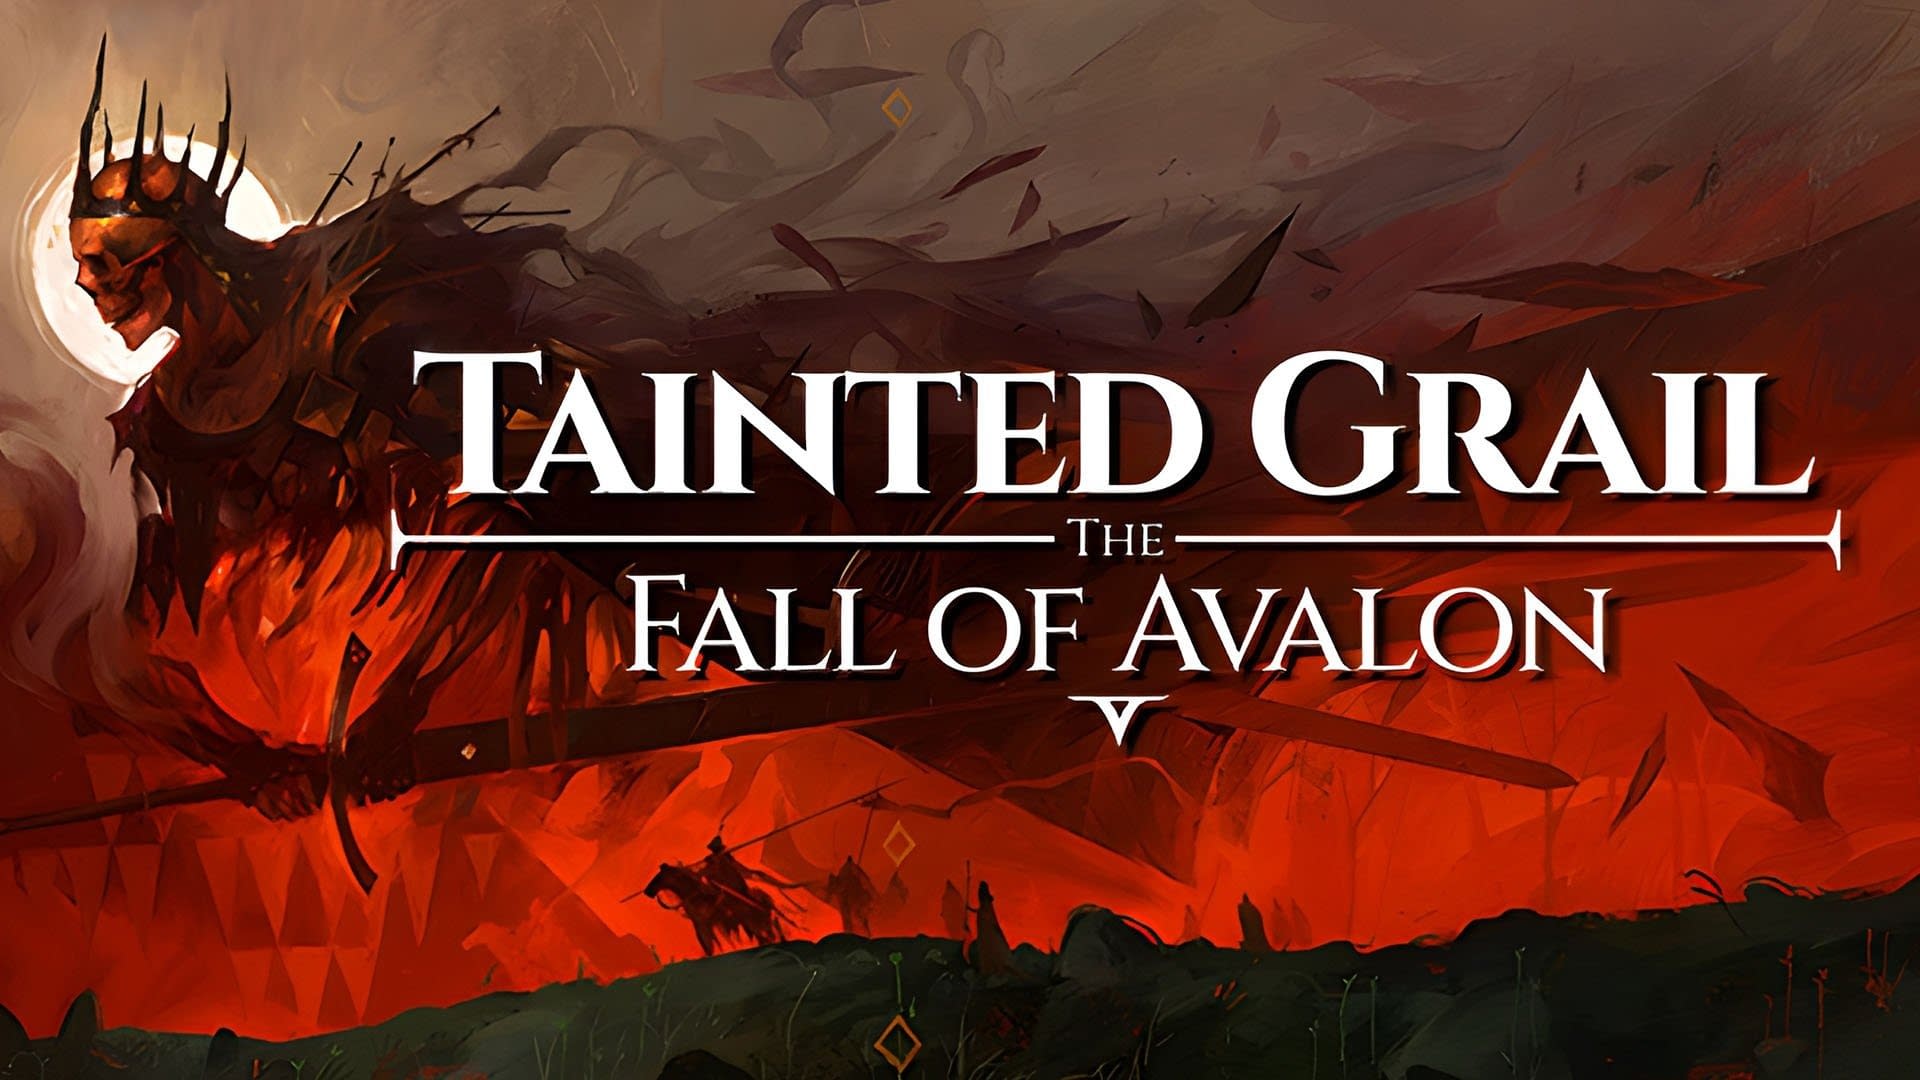 Open world role making game Tainted Grail: The Fall of Avalon’s release date is announced